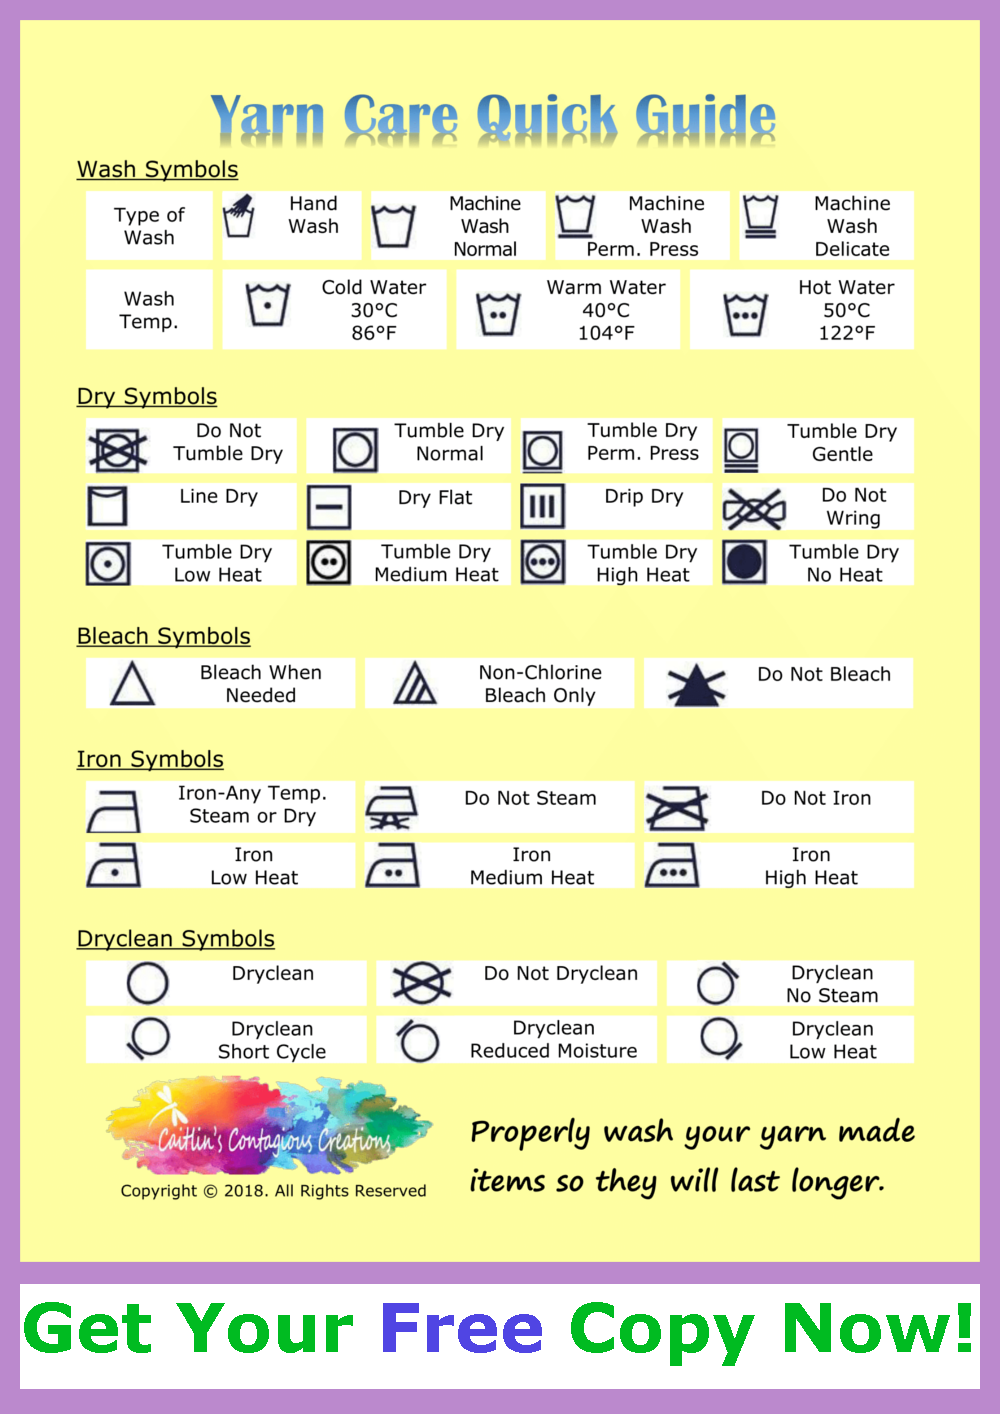 Printable PDF yarn care quick guide. Print it for your laundry room or keep with your crochet items. Never have to guess how to care for your yarn crafted handmade items. This handout is available from Caitlin's Contagious Creations.